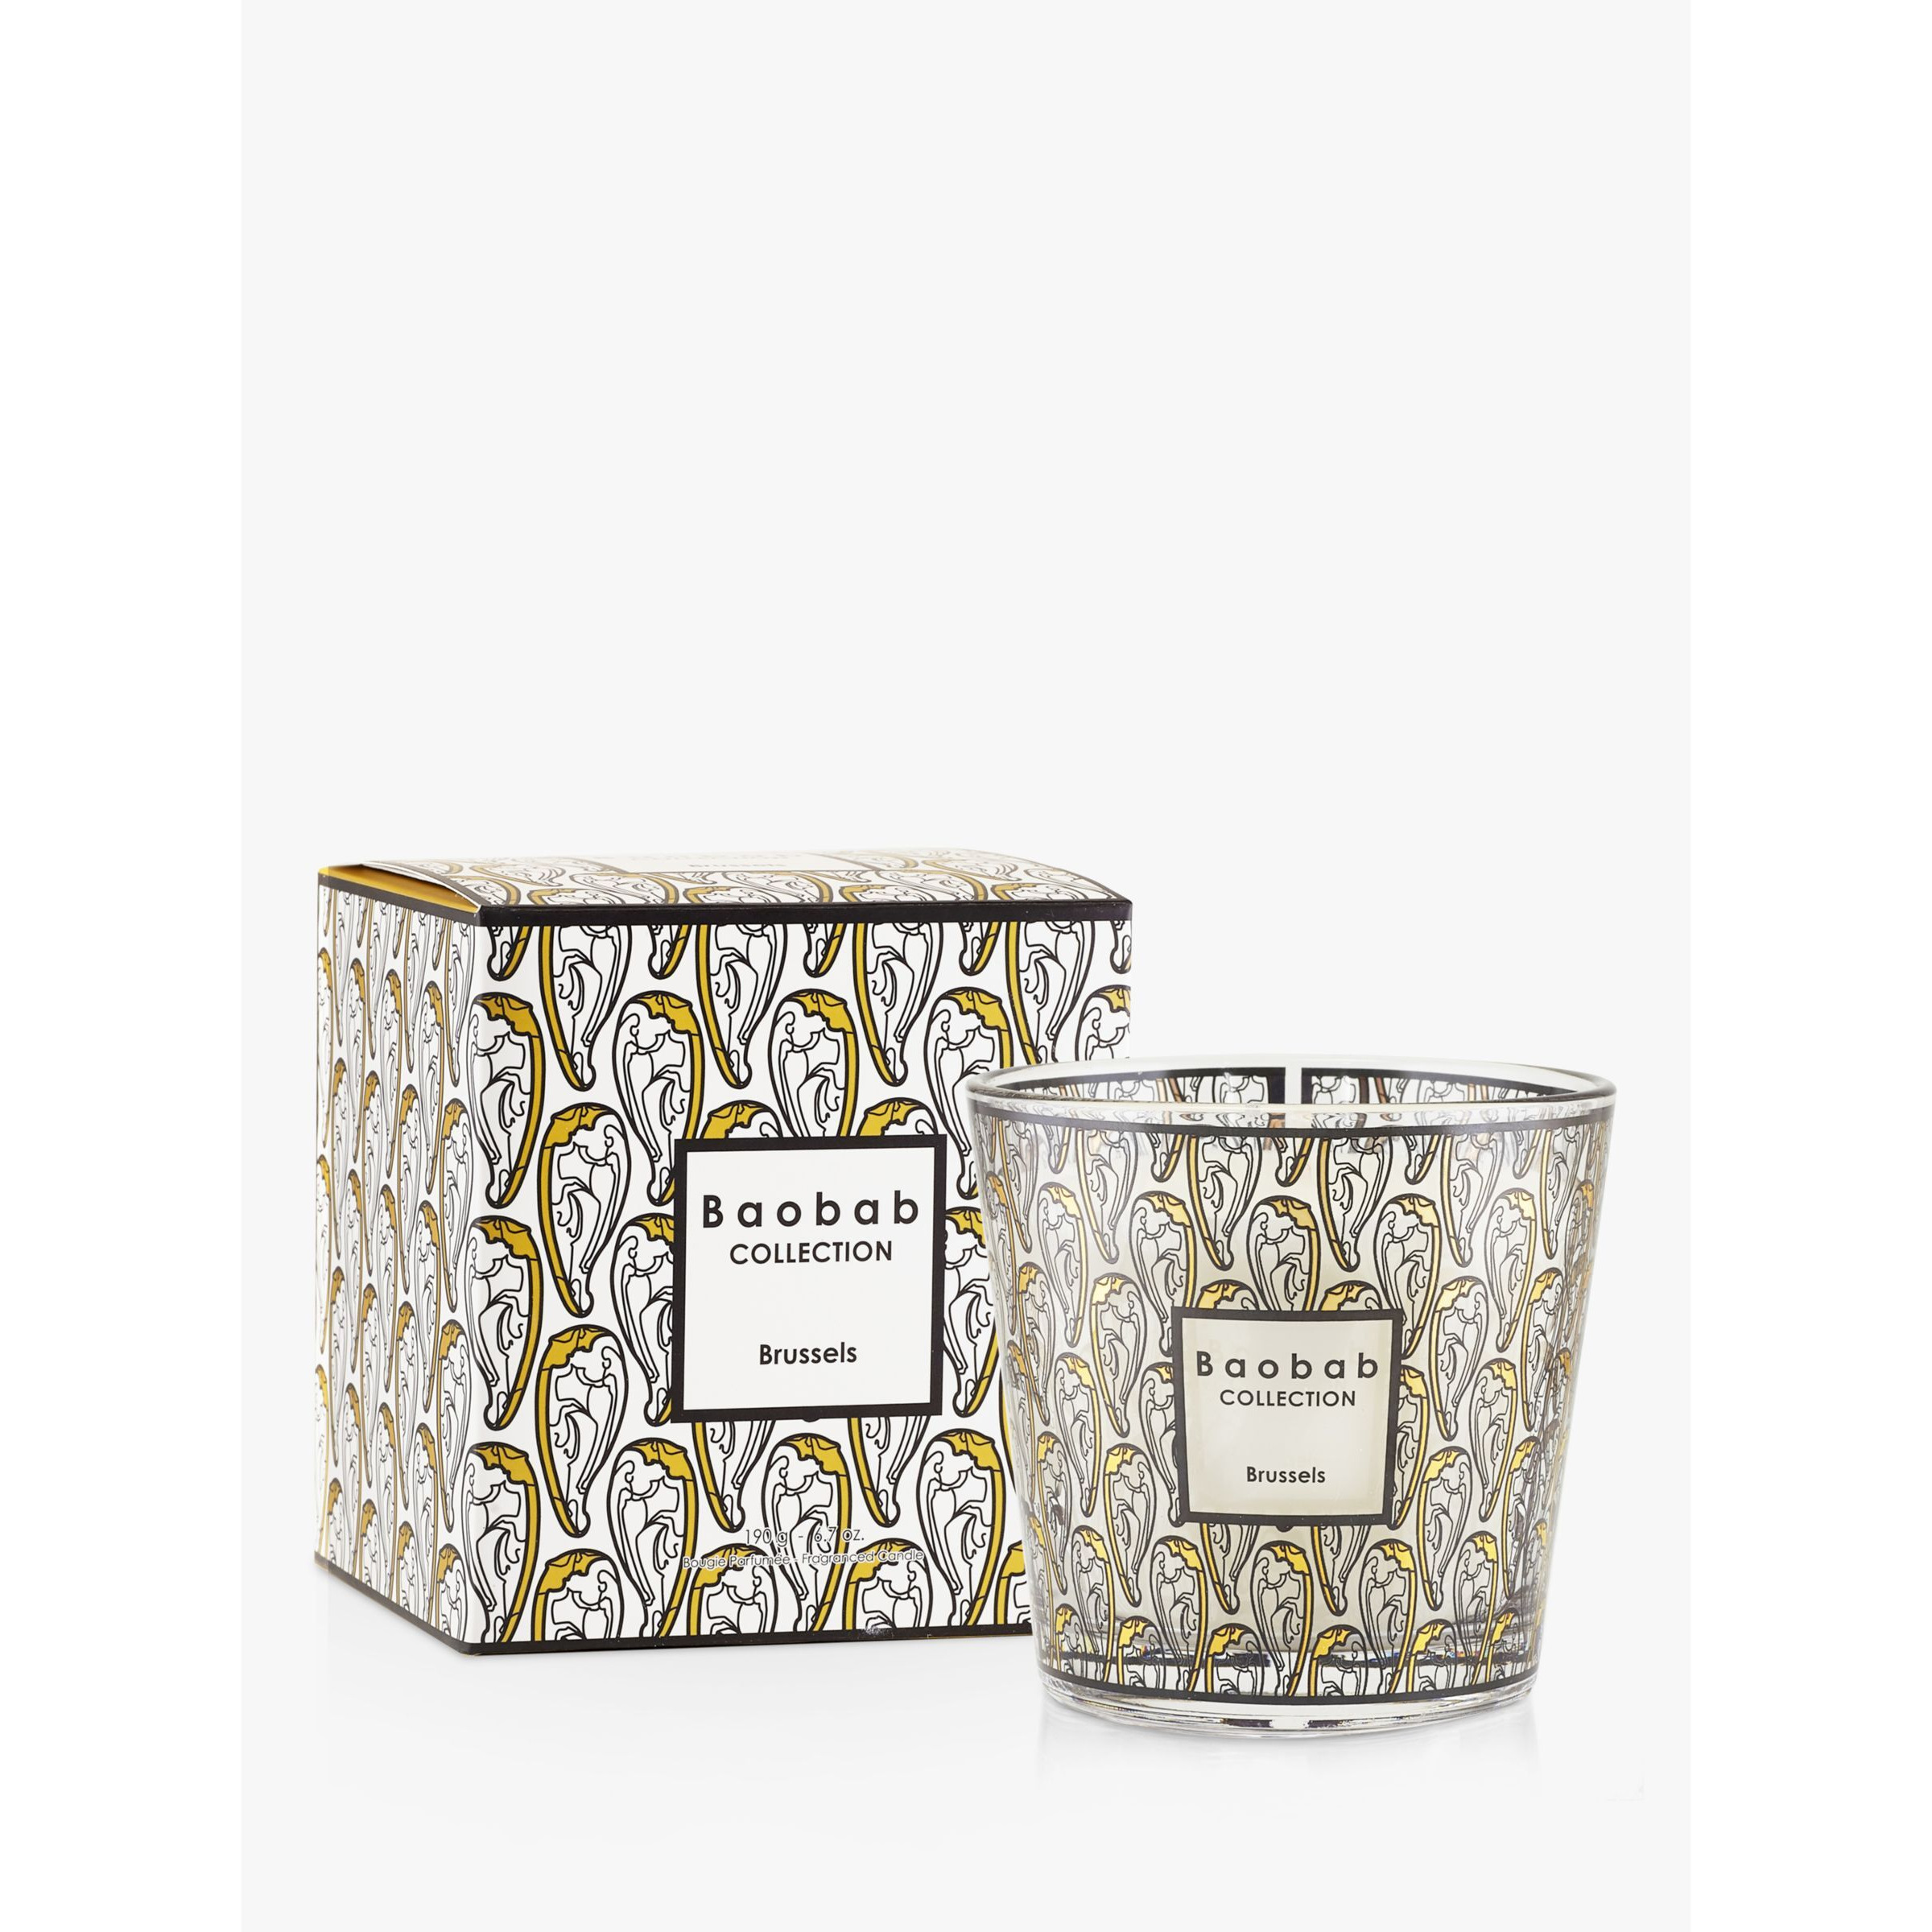 Baobab Collection My First Baobab Brussels Scented Candle, 190g - image 1